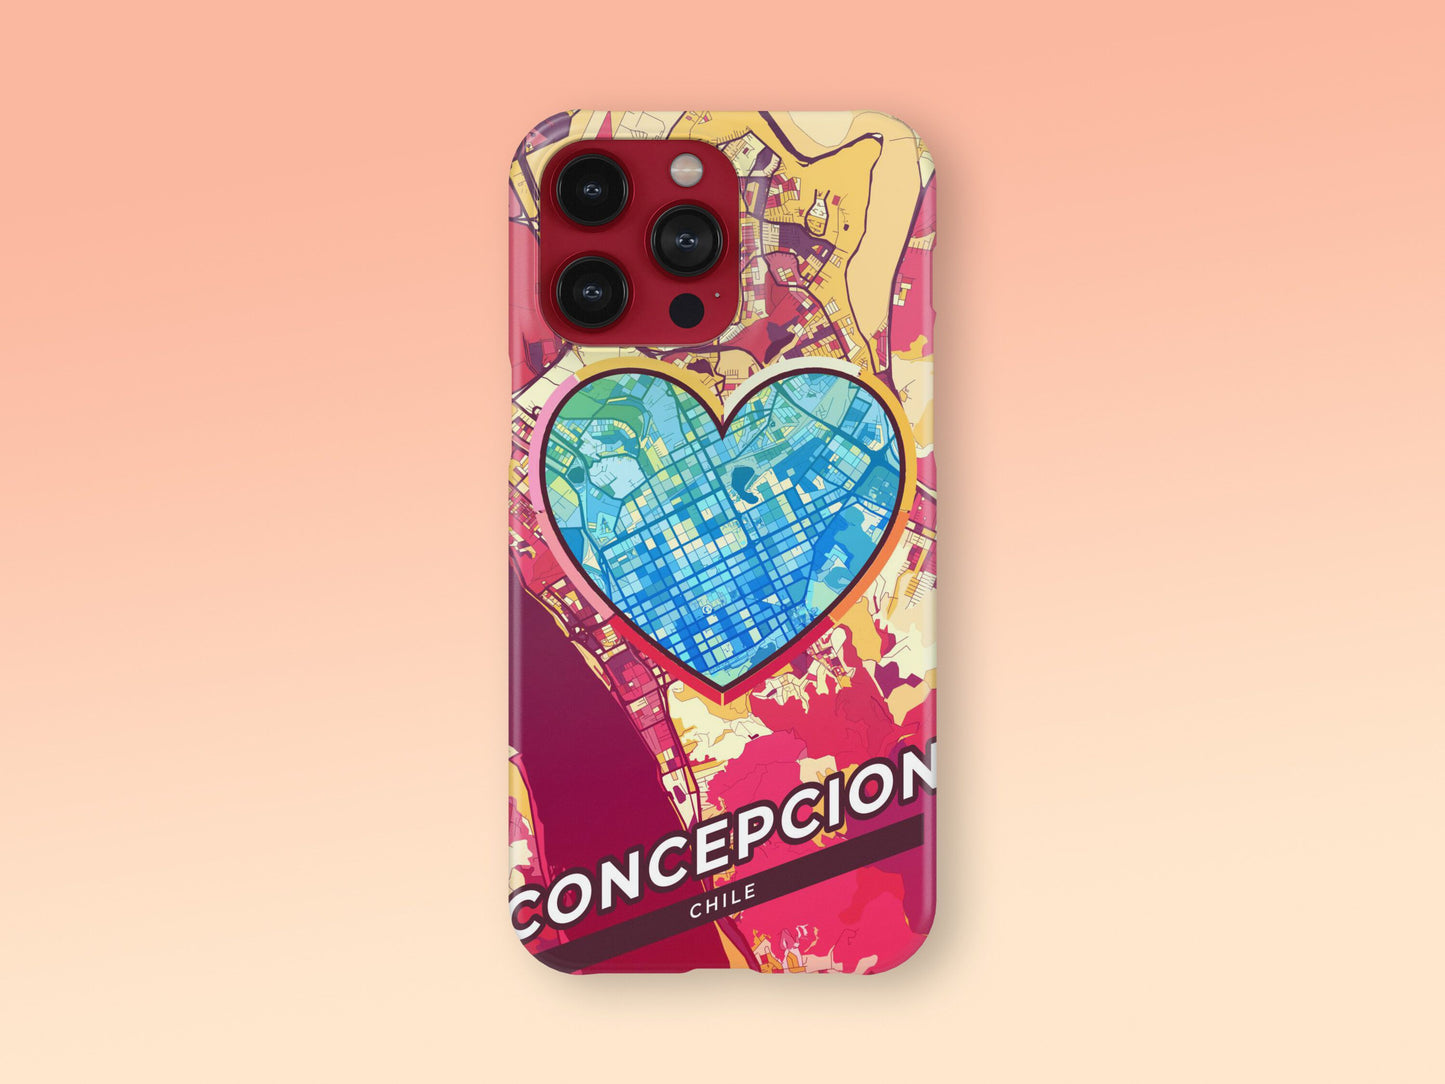 Concepcion Chile slim phone case with colorful icon. Birthday, wedding or housewarming gift. Couple match cases. 2